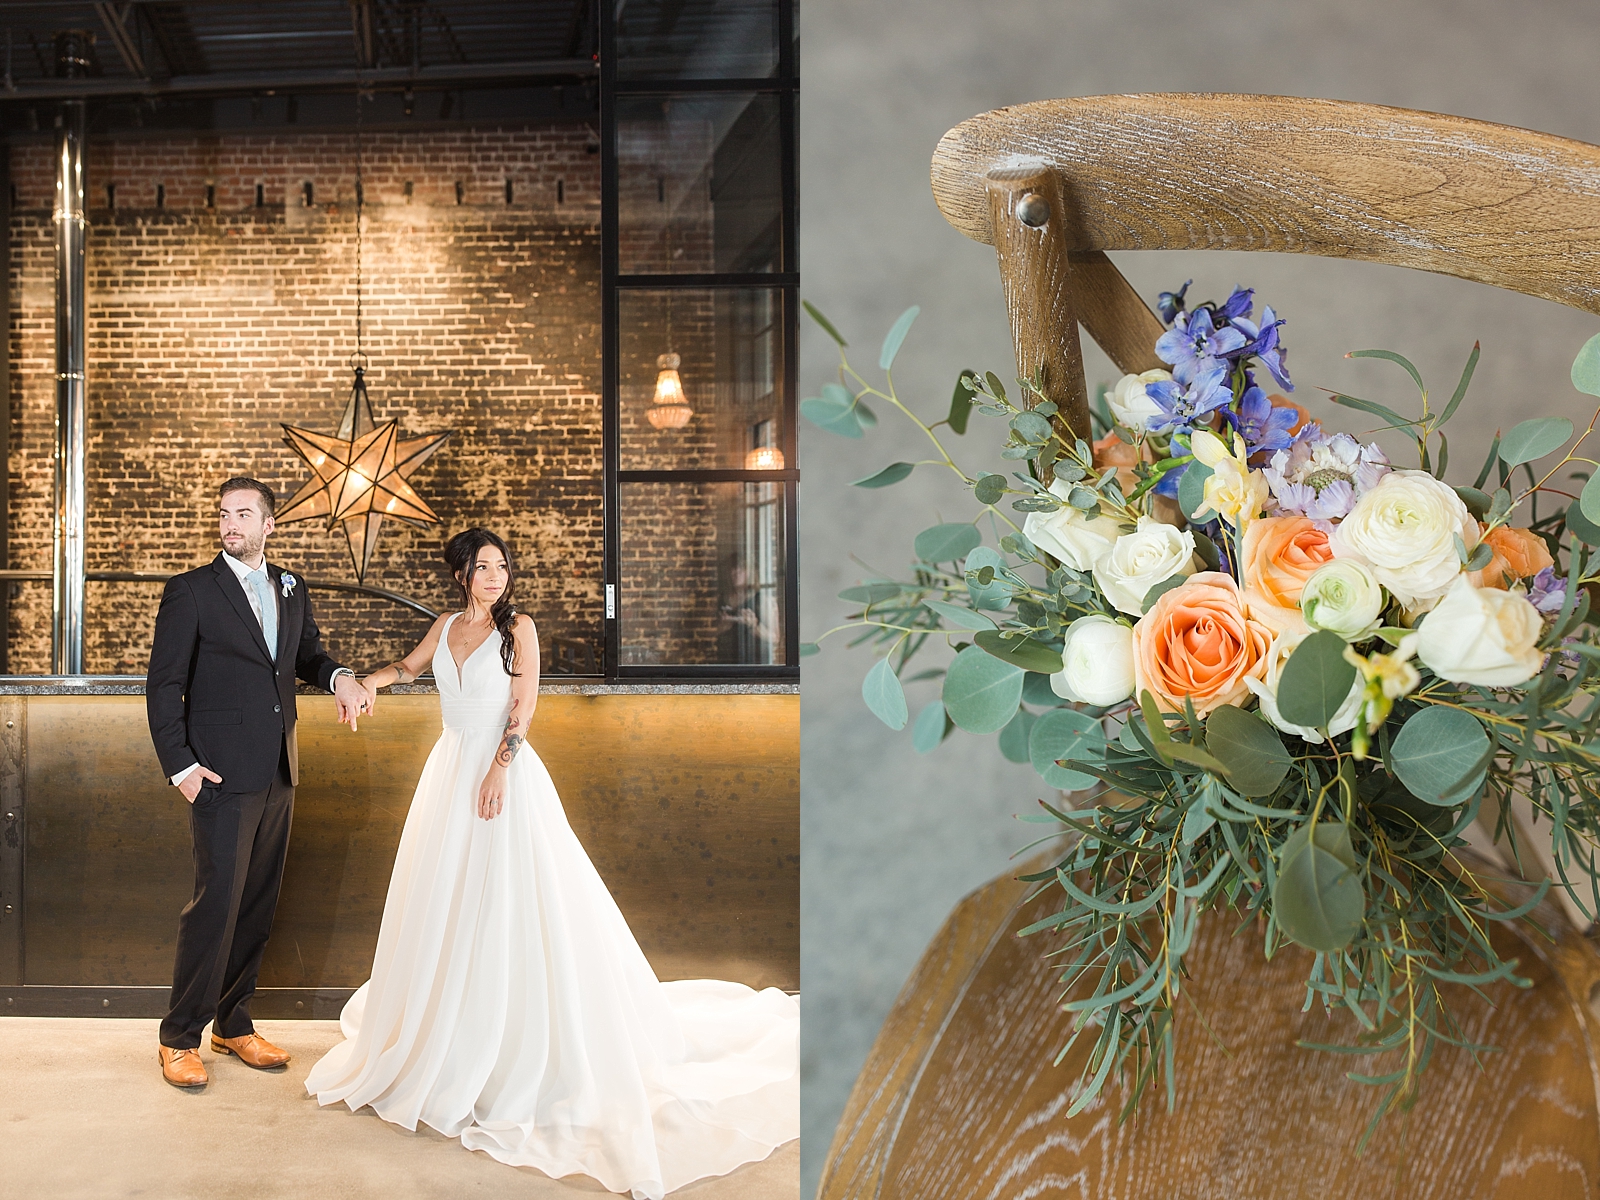 Glover Park Brewery Wedding Bride and groom in venue and Bridal bouquet on chair Photos